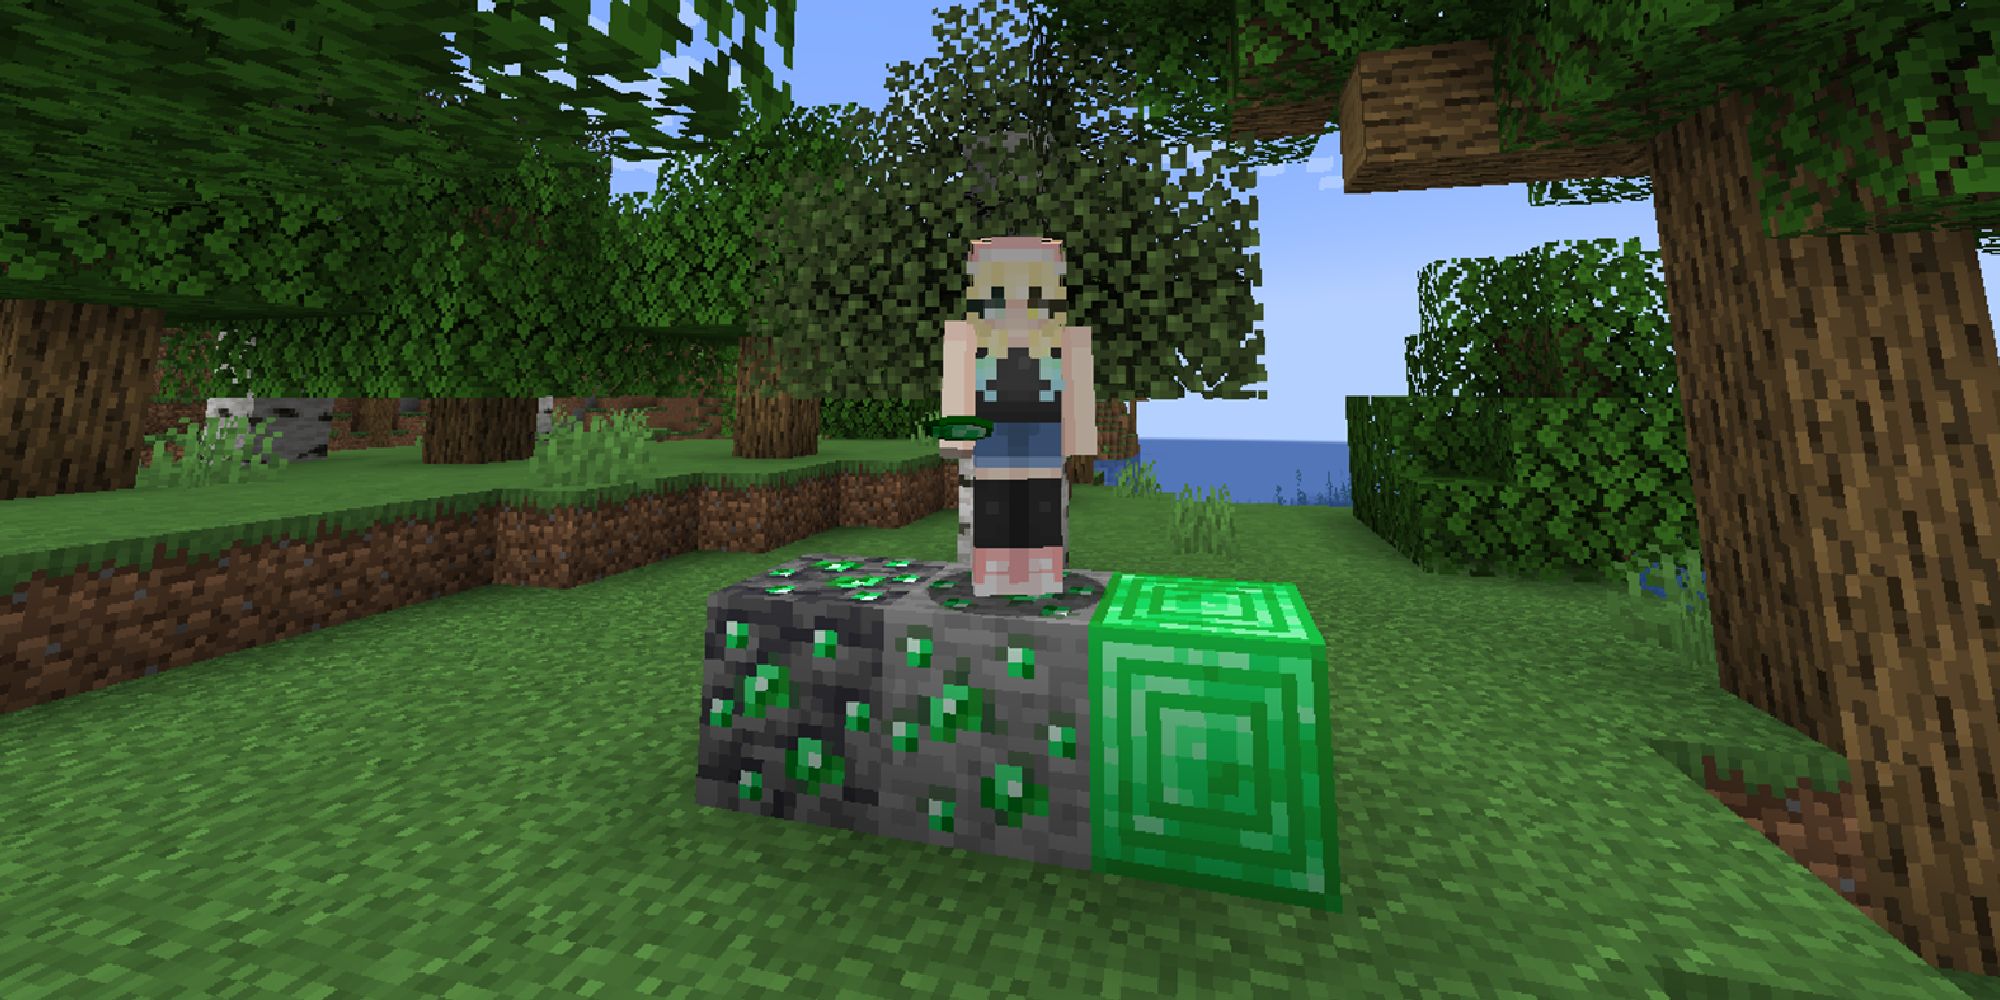 minecraft player standing on emerald blocks with an emerald in hand